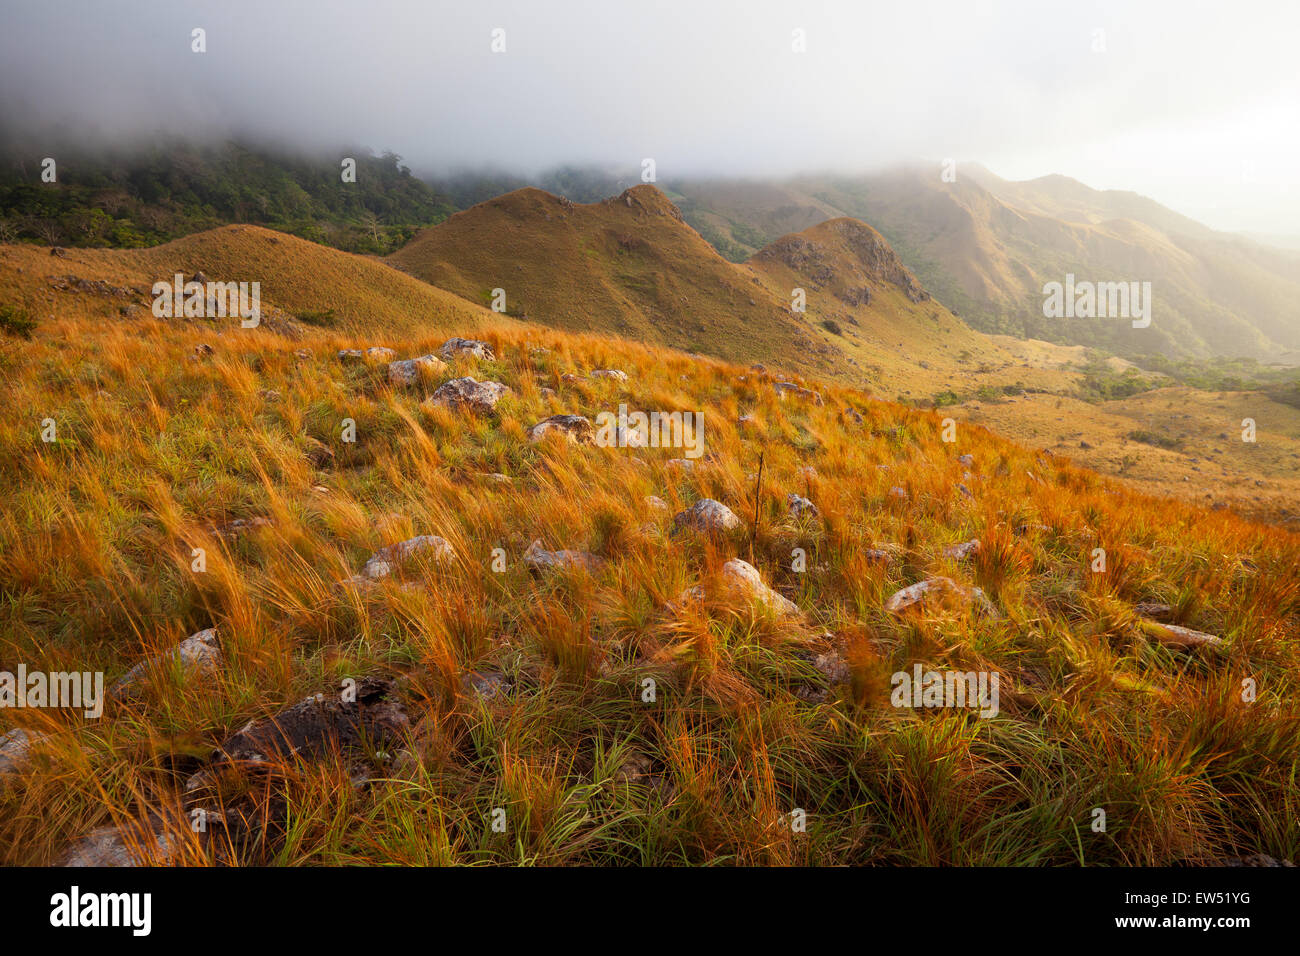 Early morning light and mist in the mountains of Altos de Campana national park, Panama province, Pacific slope, Republic of Panama, Central America Stock Photo